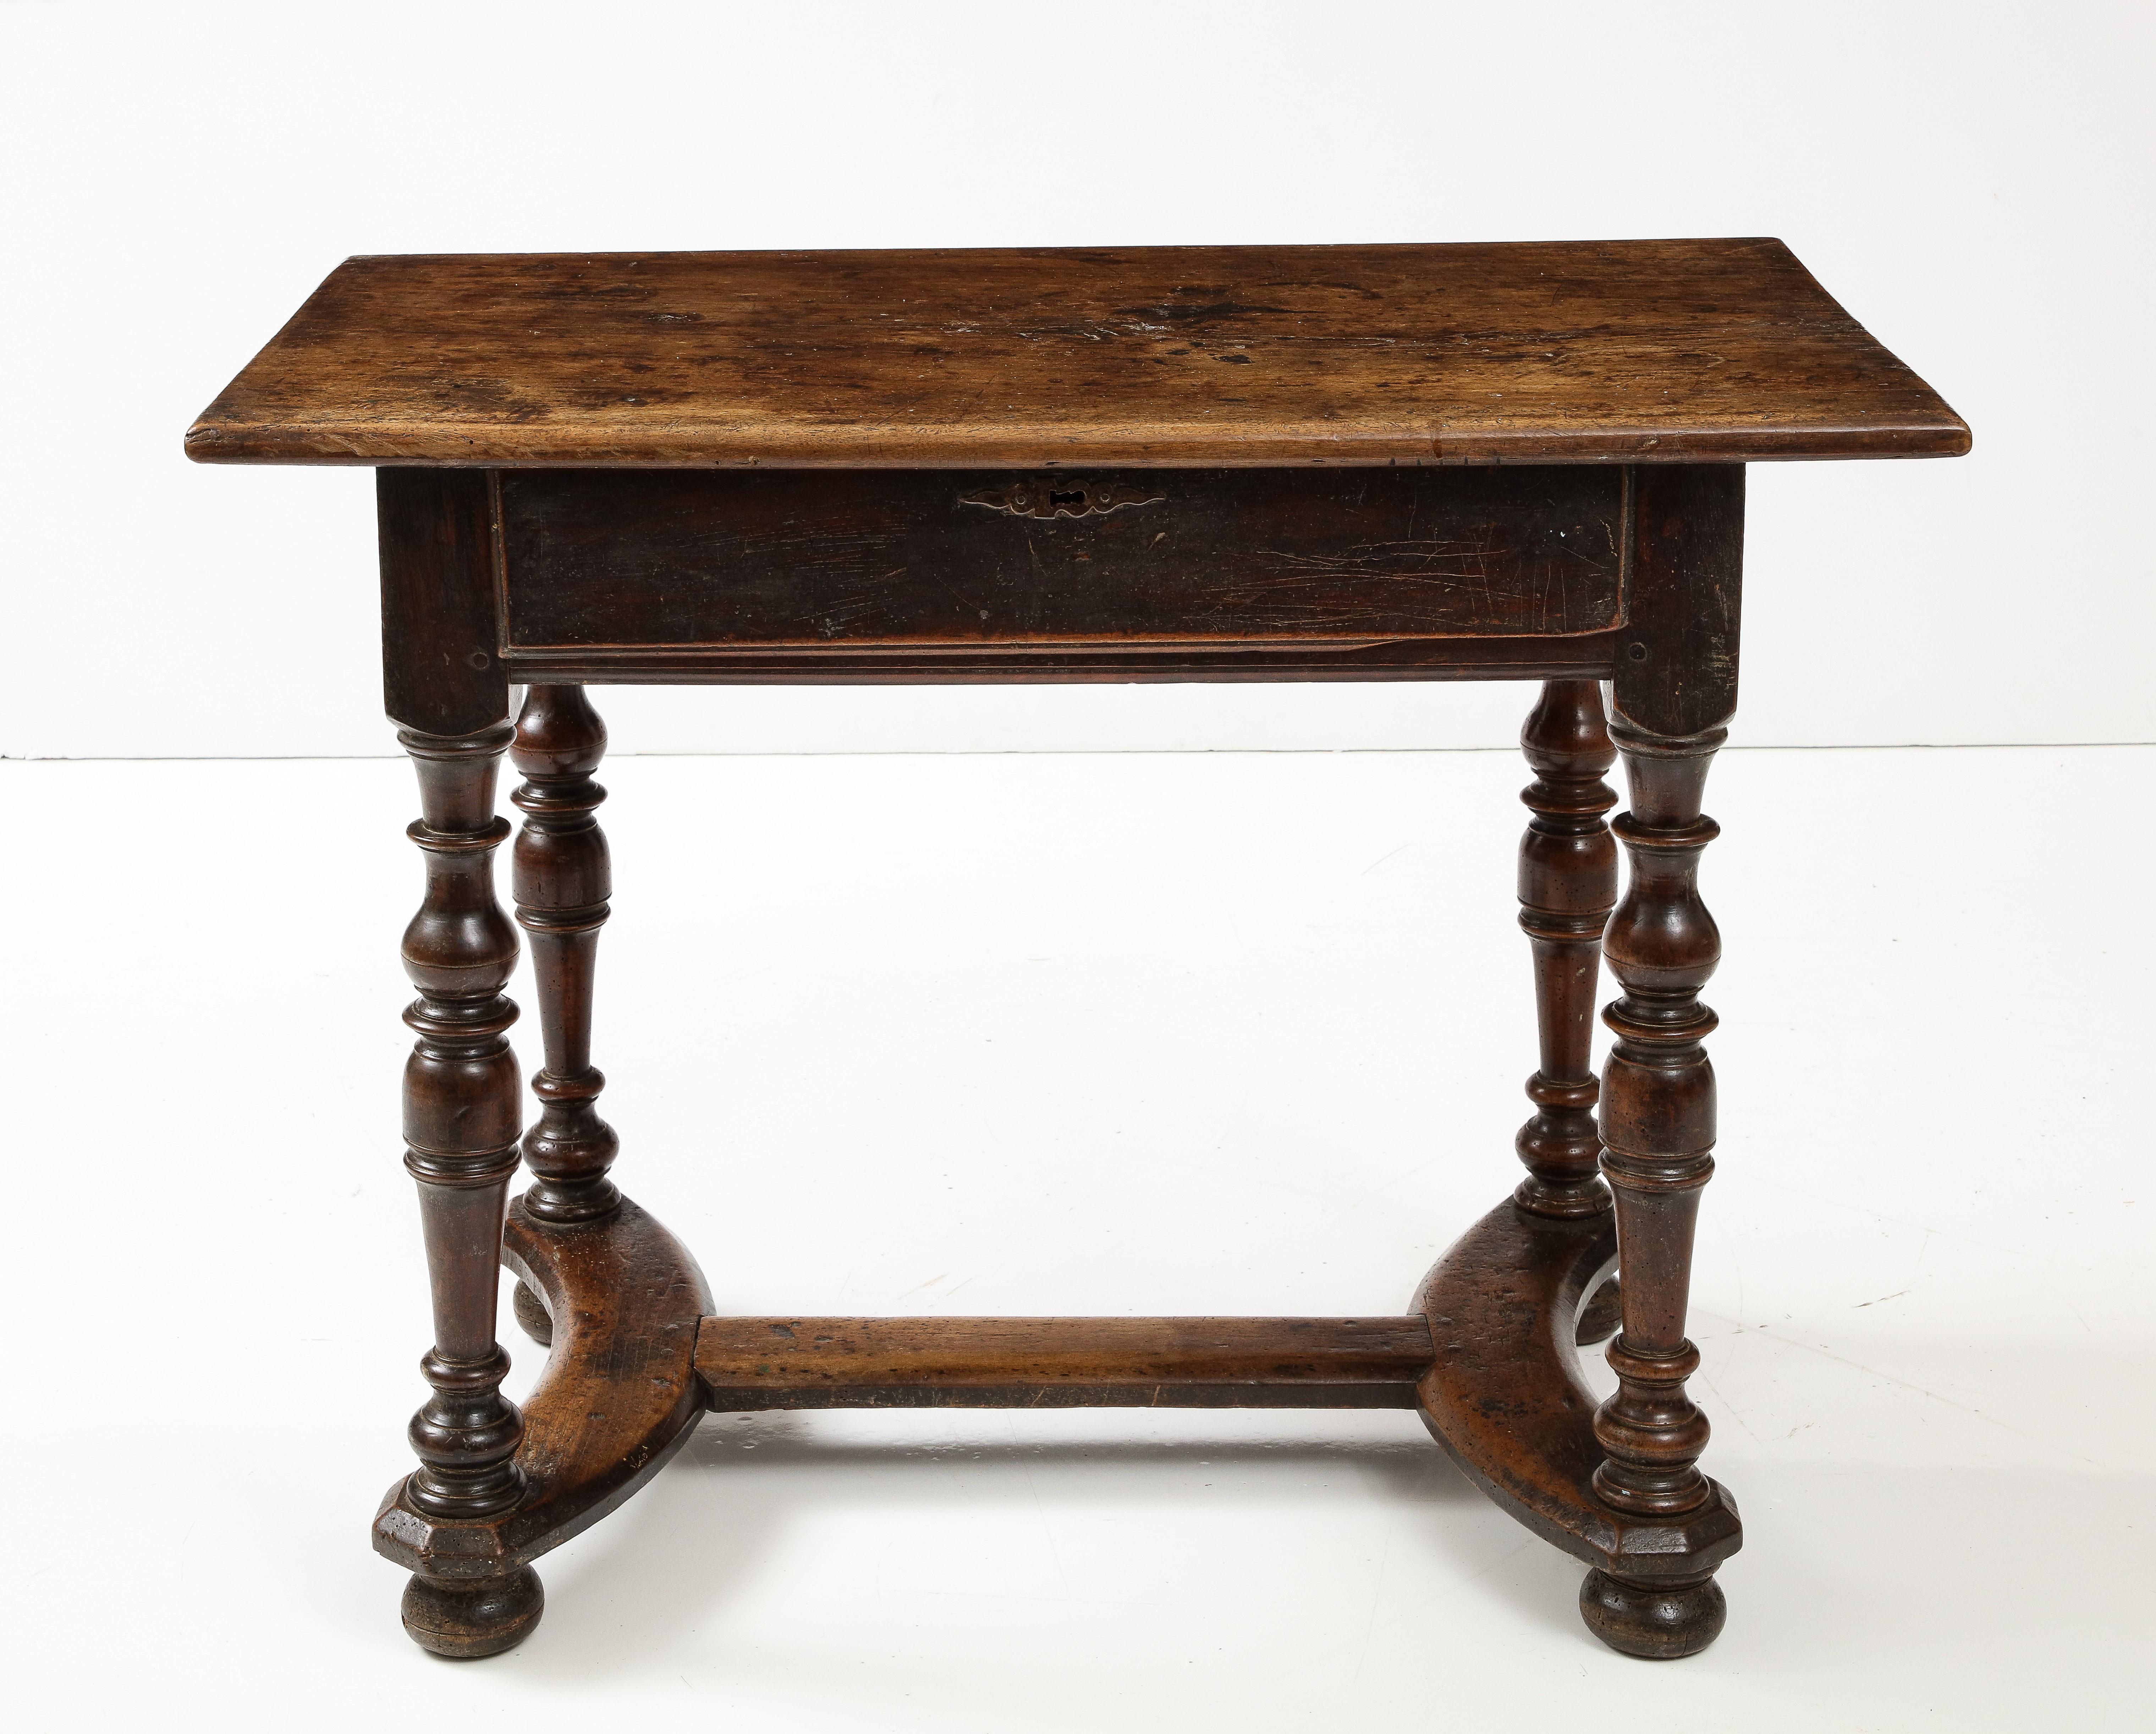 18th C. French Walnut Table, possibly Flemish
Glowing patina

H: 28.75 D: 22 W: 36 in.